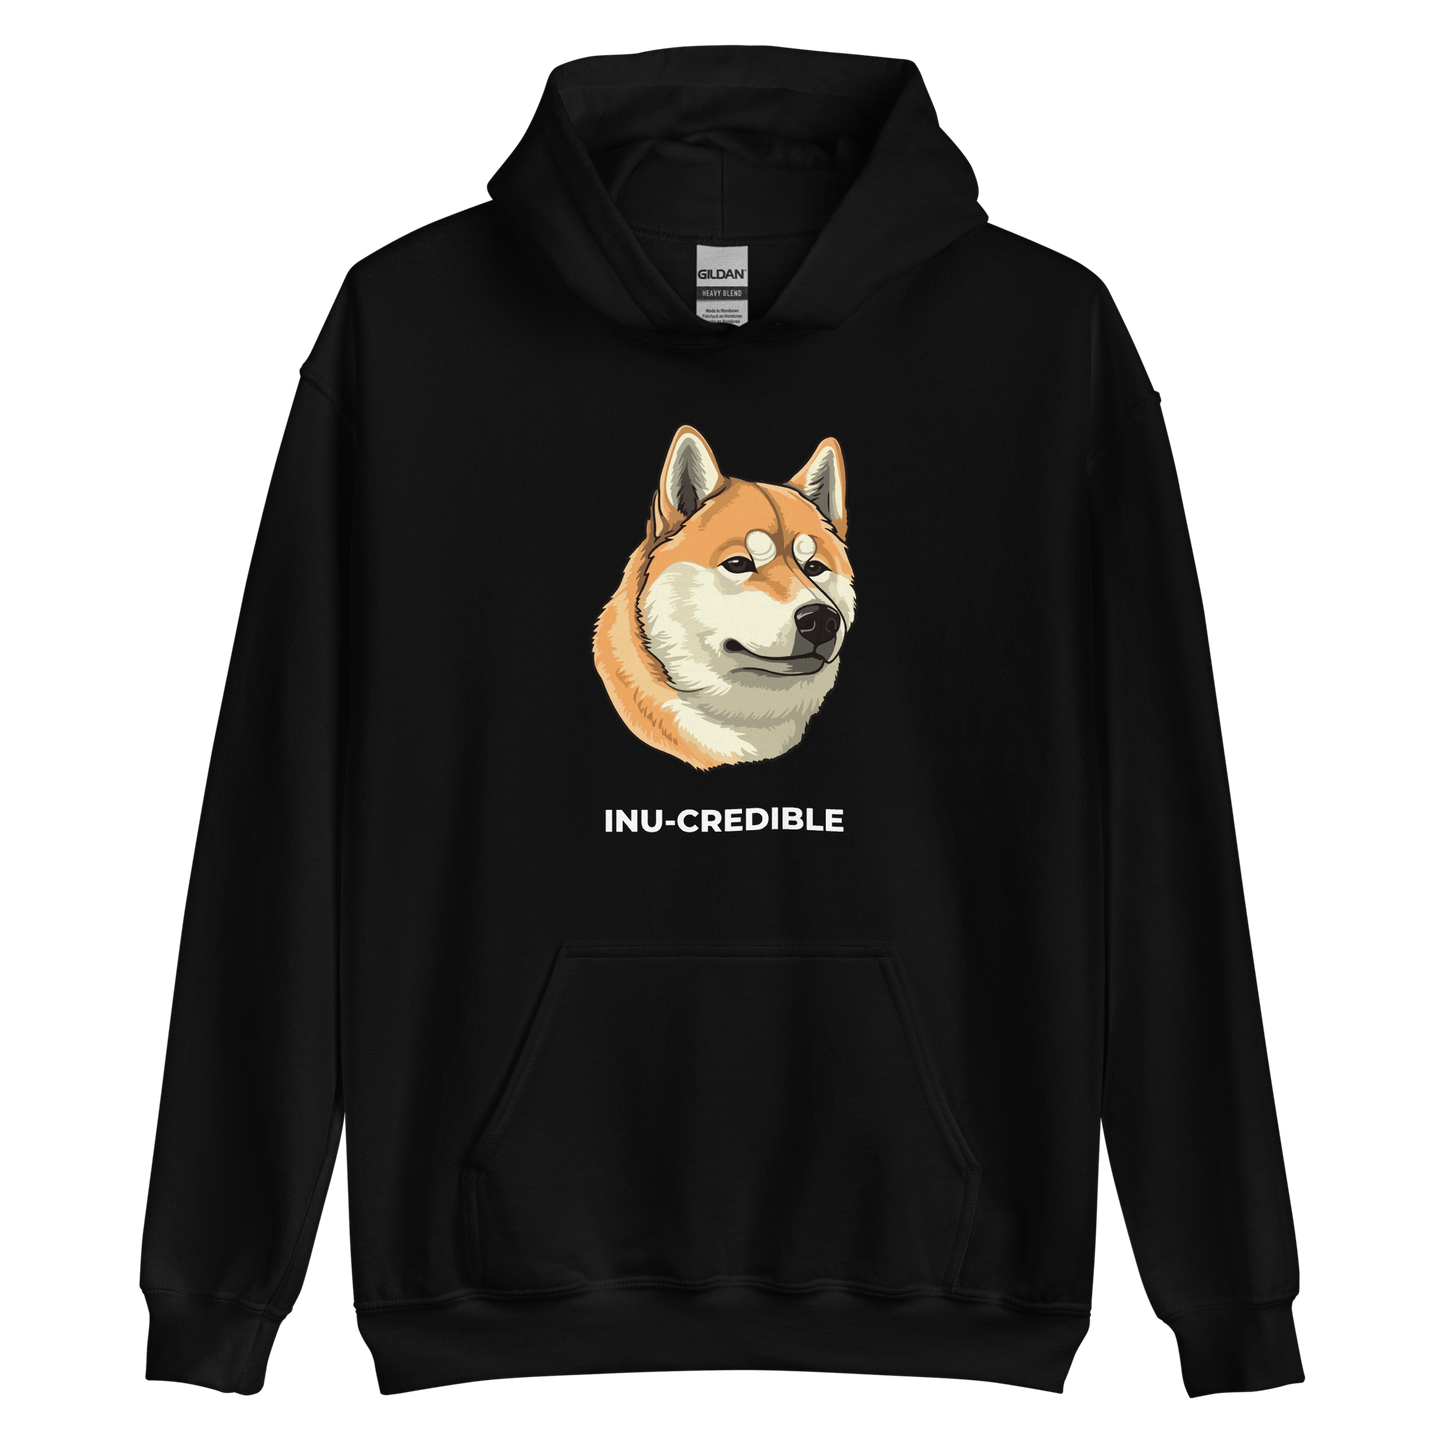 Black Shiba Inu Hoodie featuring the Inu-Credible graphic on the chest - Funny Graphic Shiba Inu Hoodies - Boozy Fox